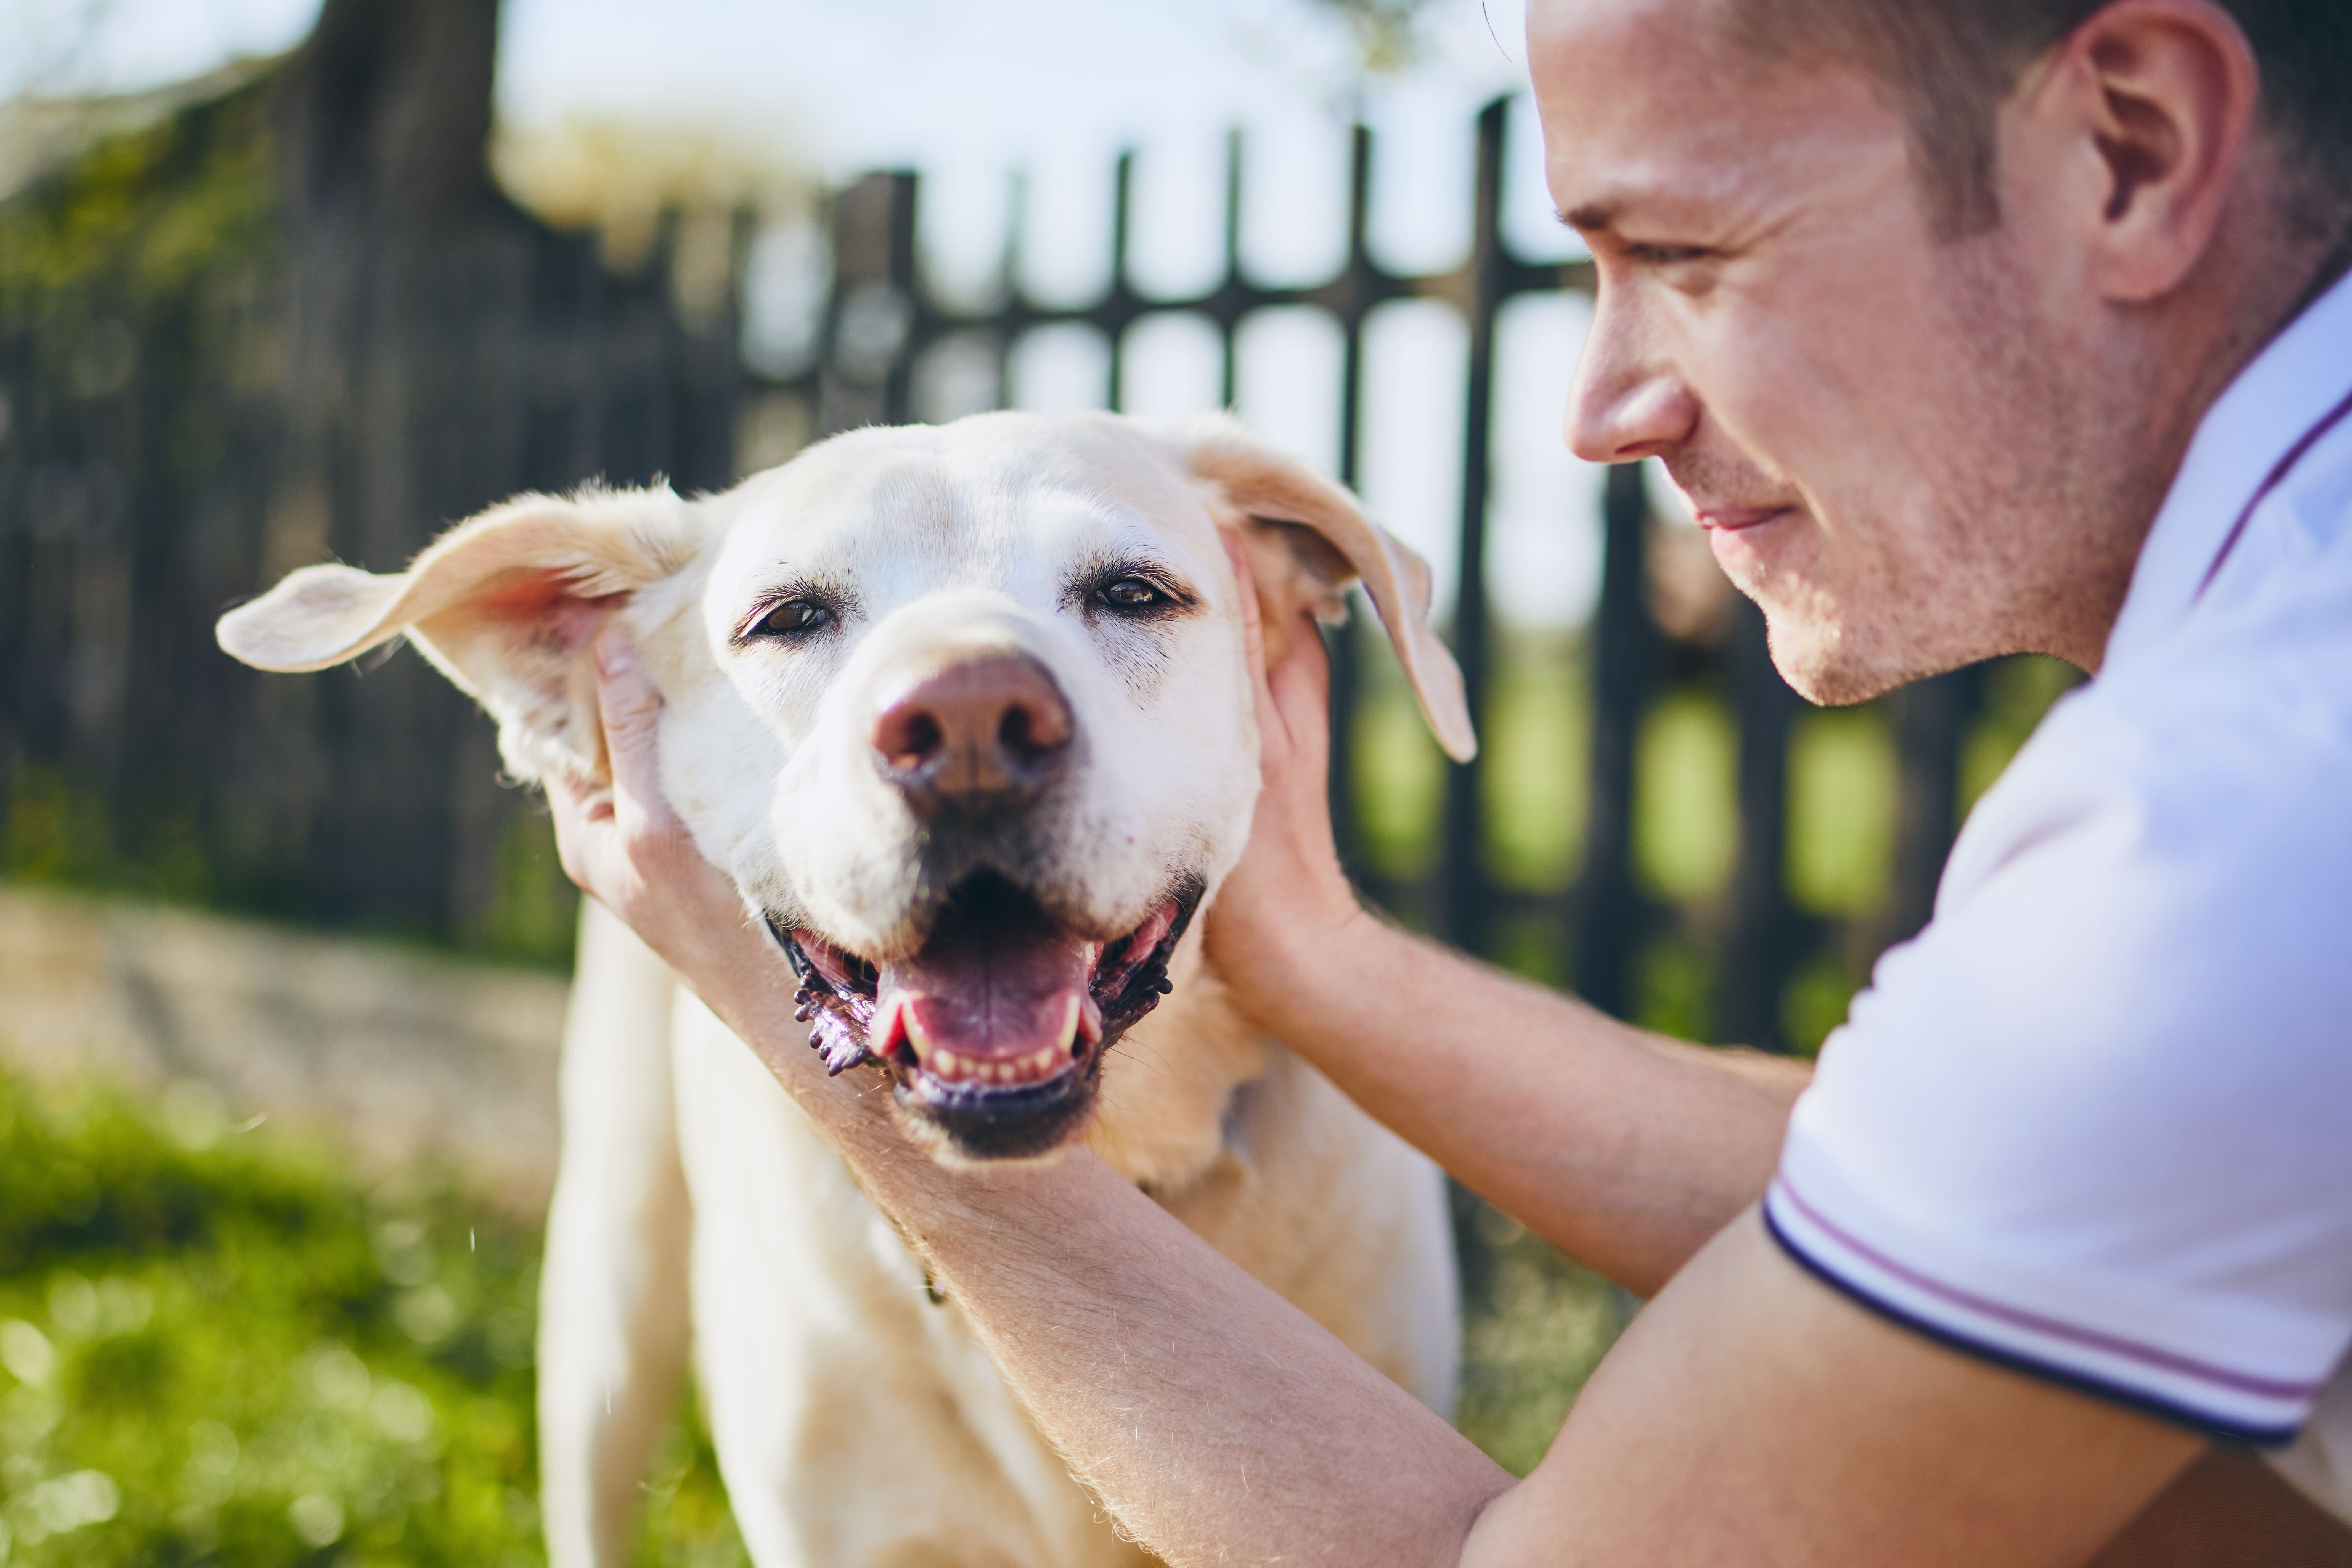 Dog owner scratching ears of happy dog, fence in background